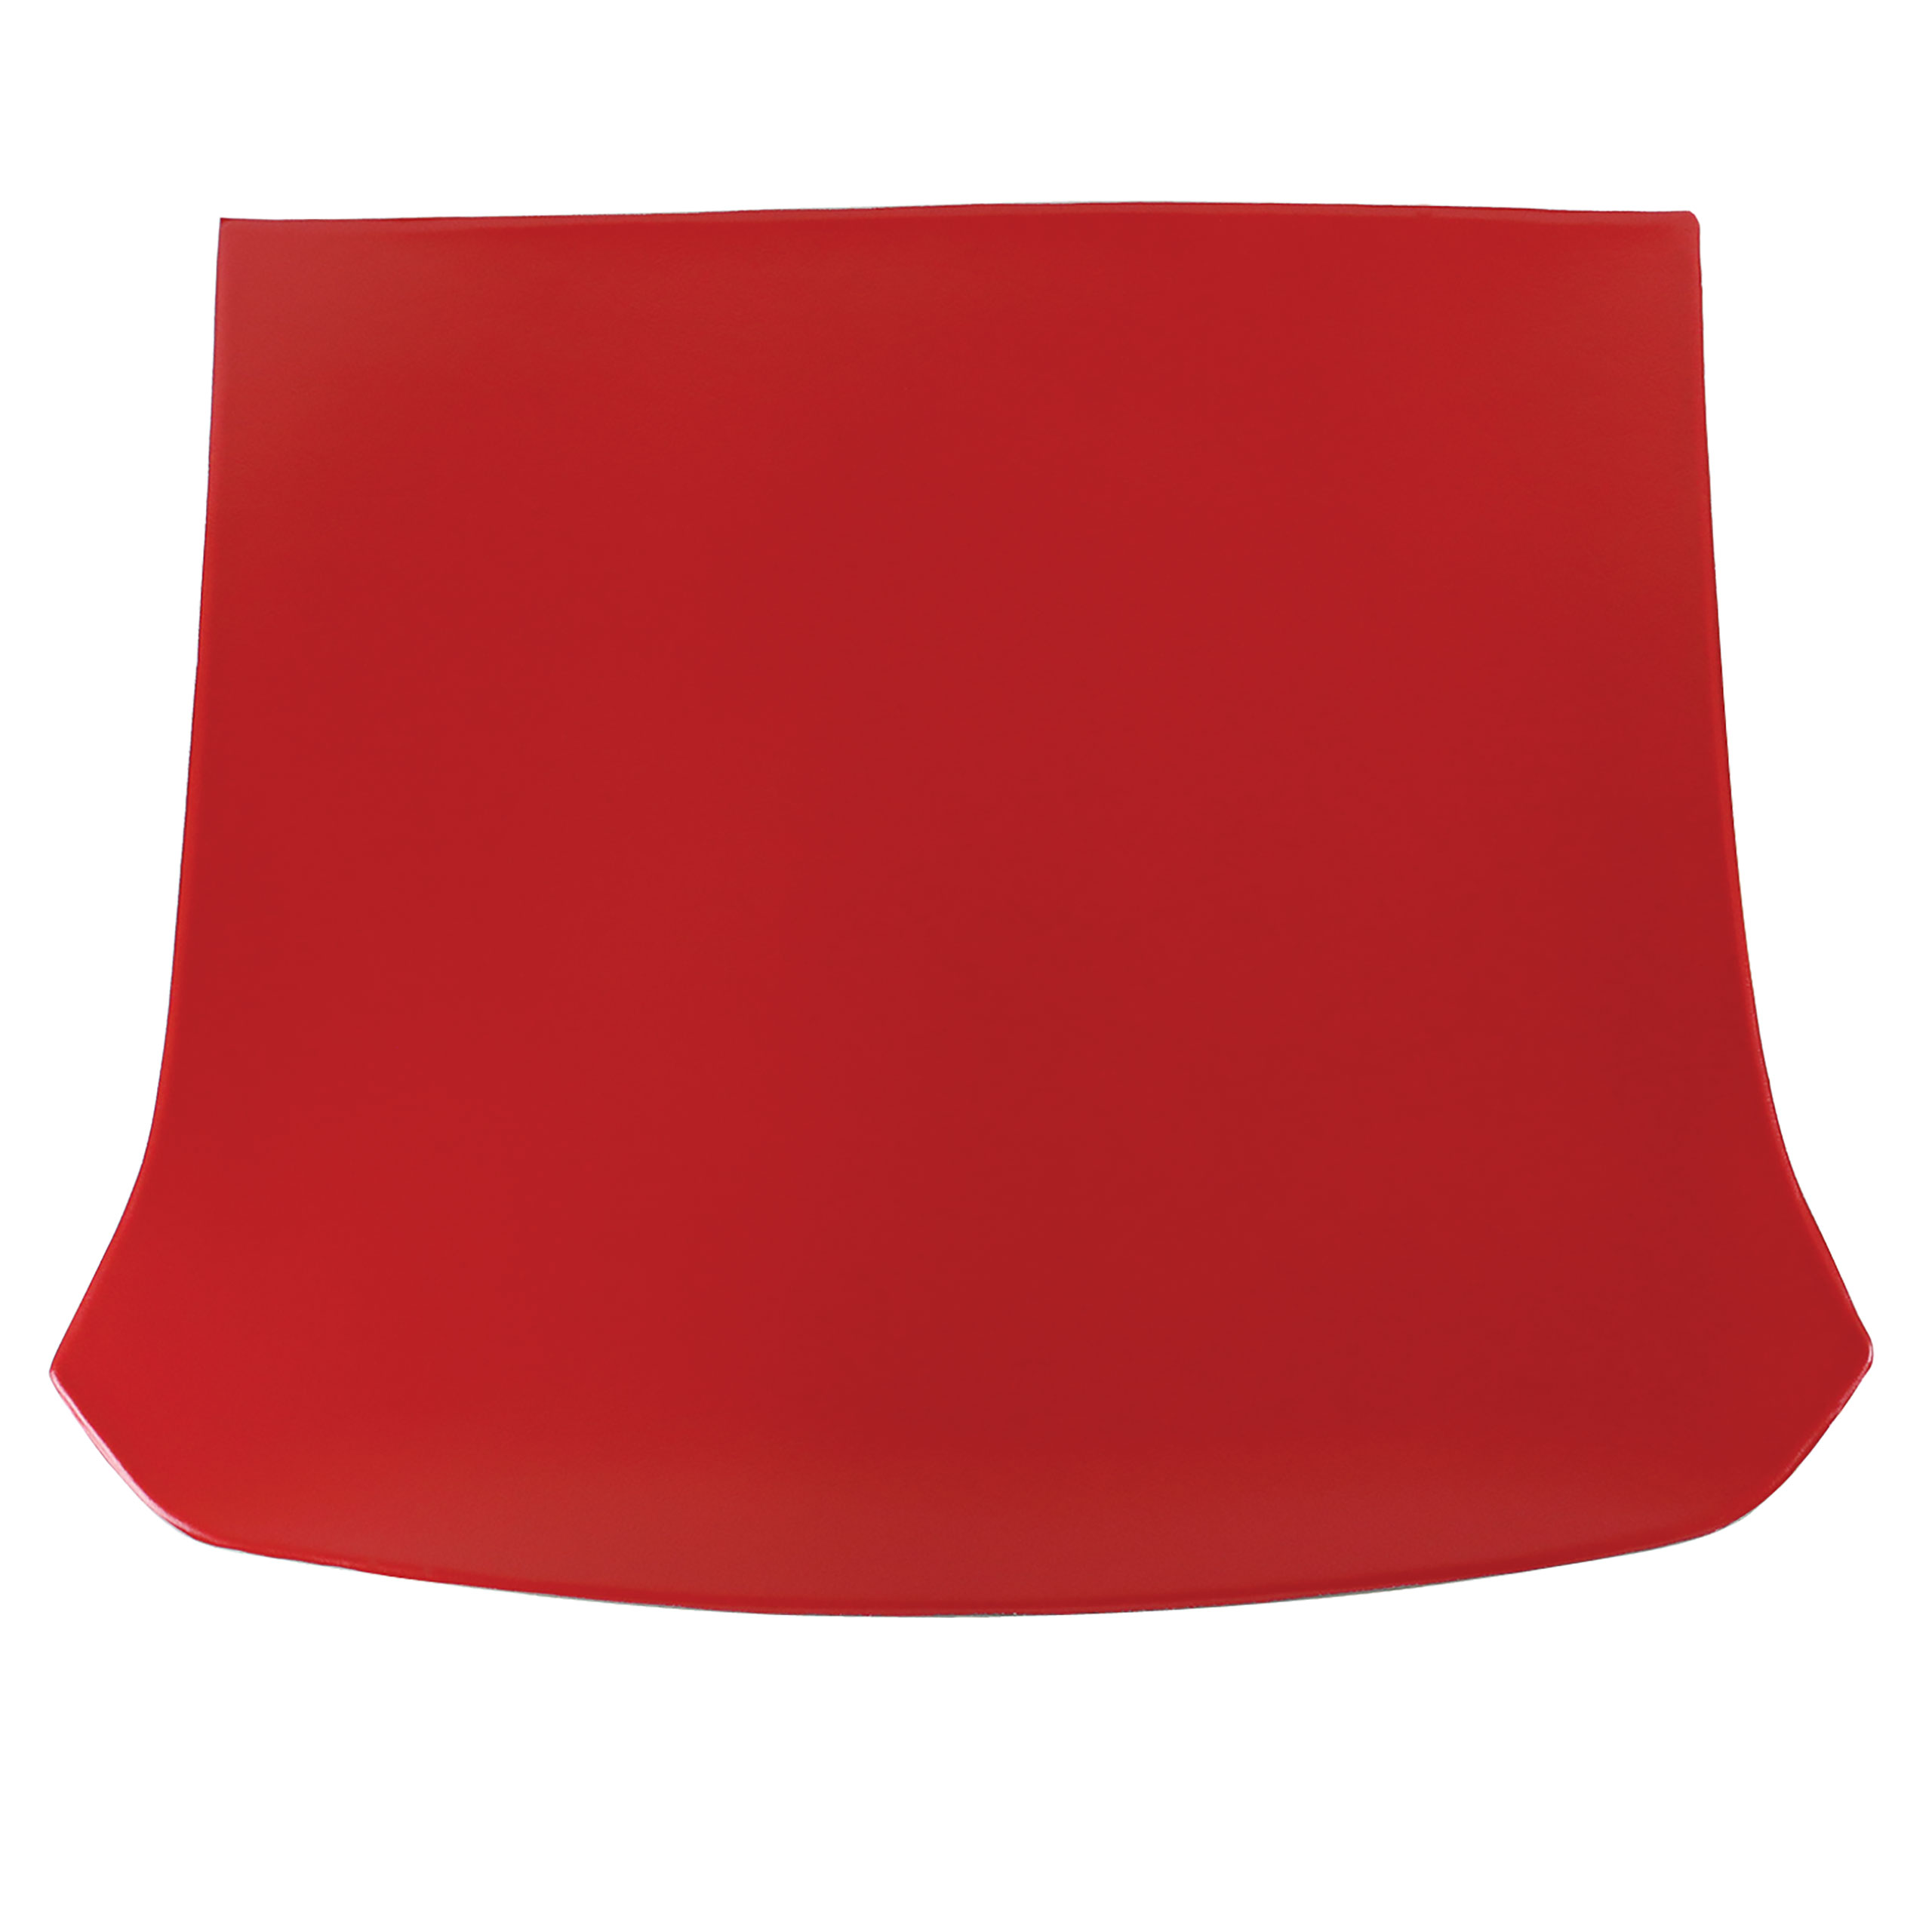 1965 C2 Corvette Replacement Coupe Headliner- Red